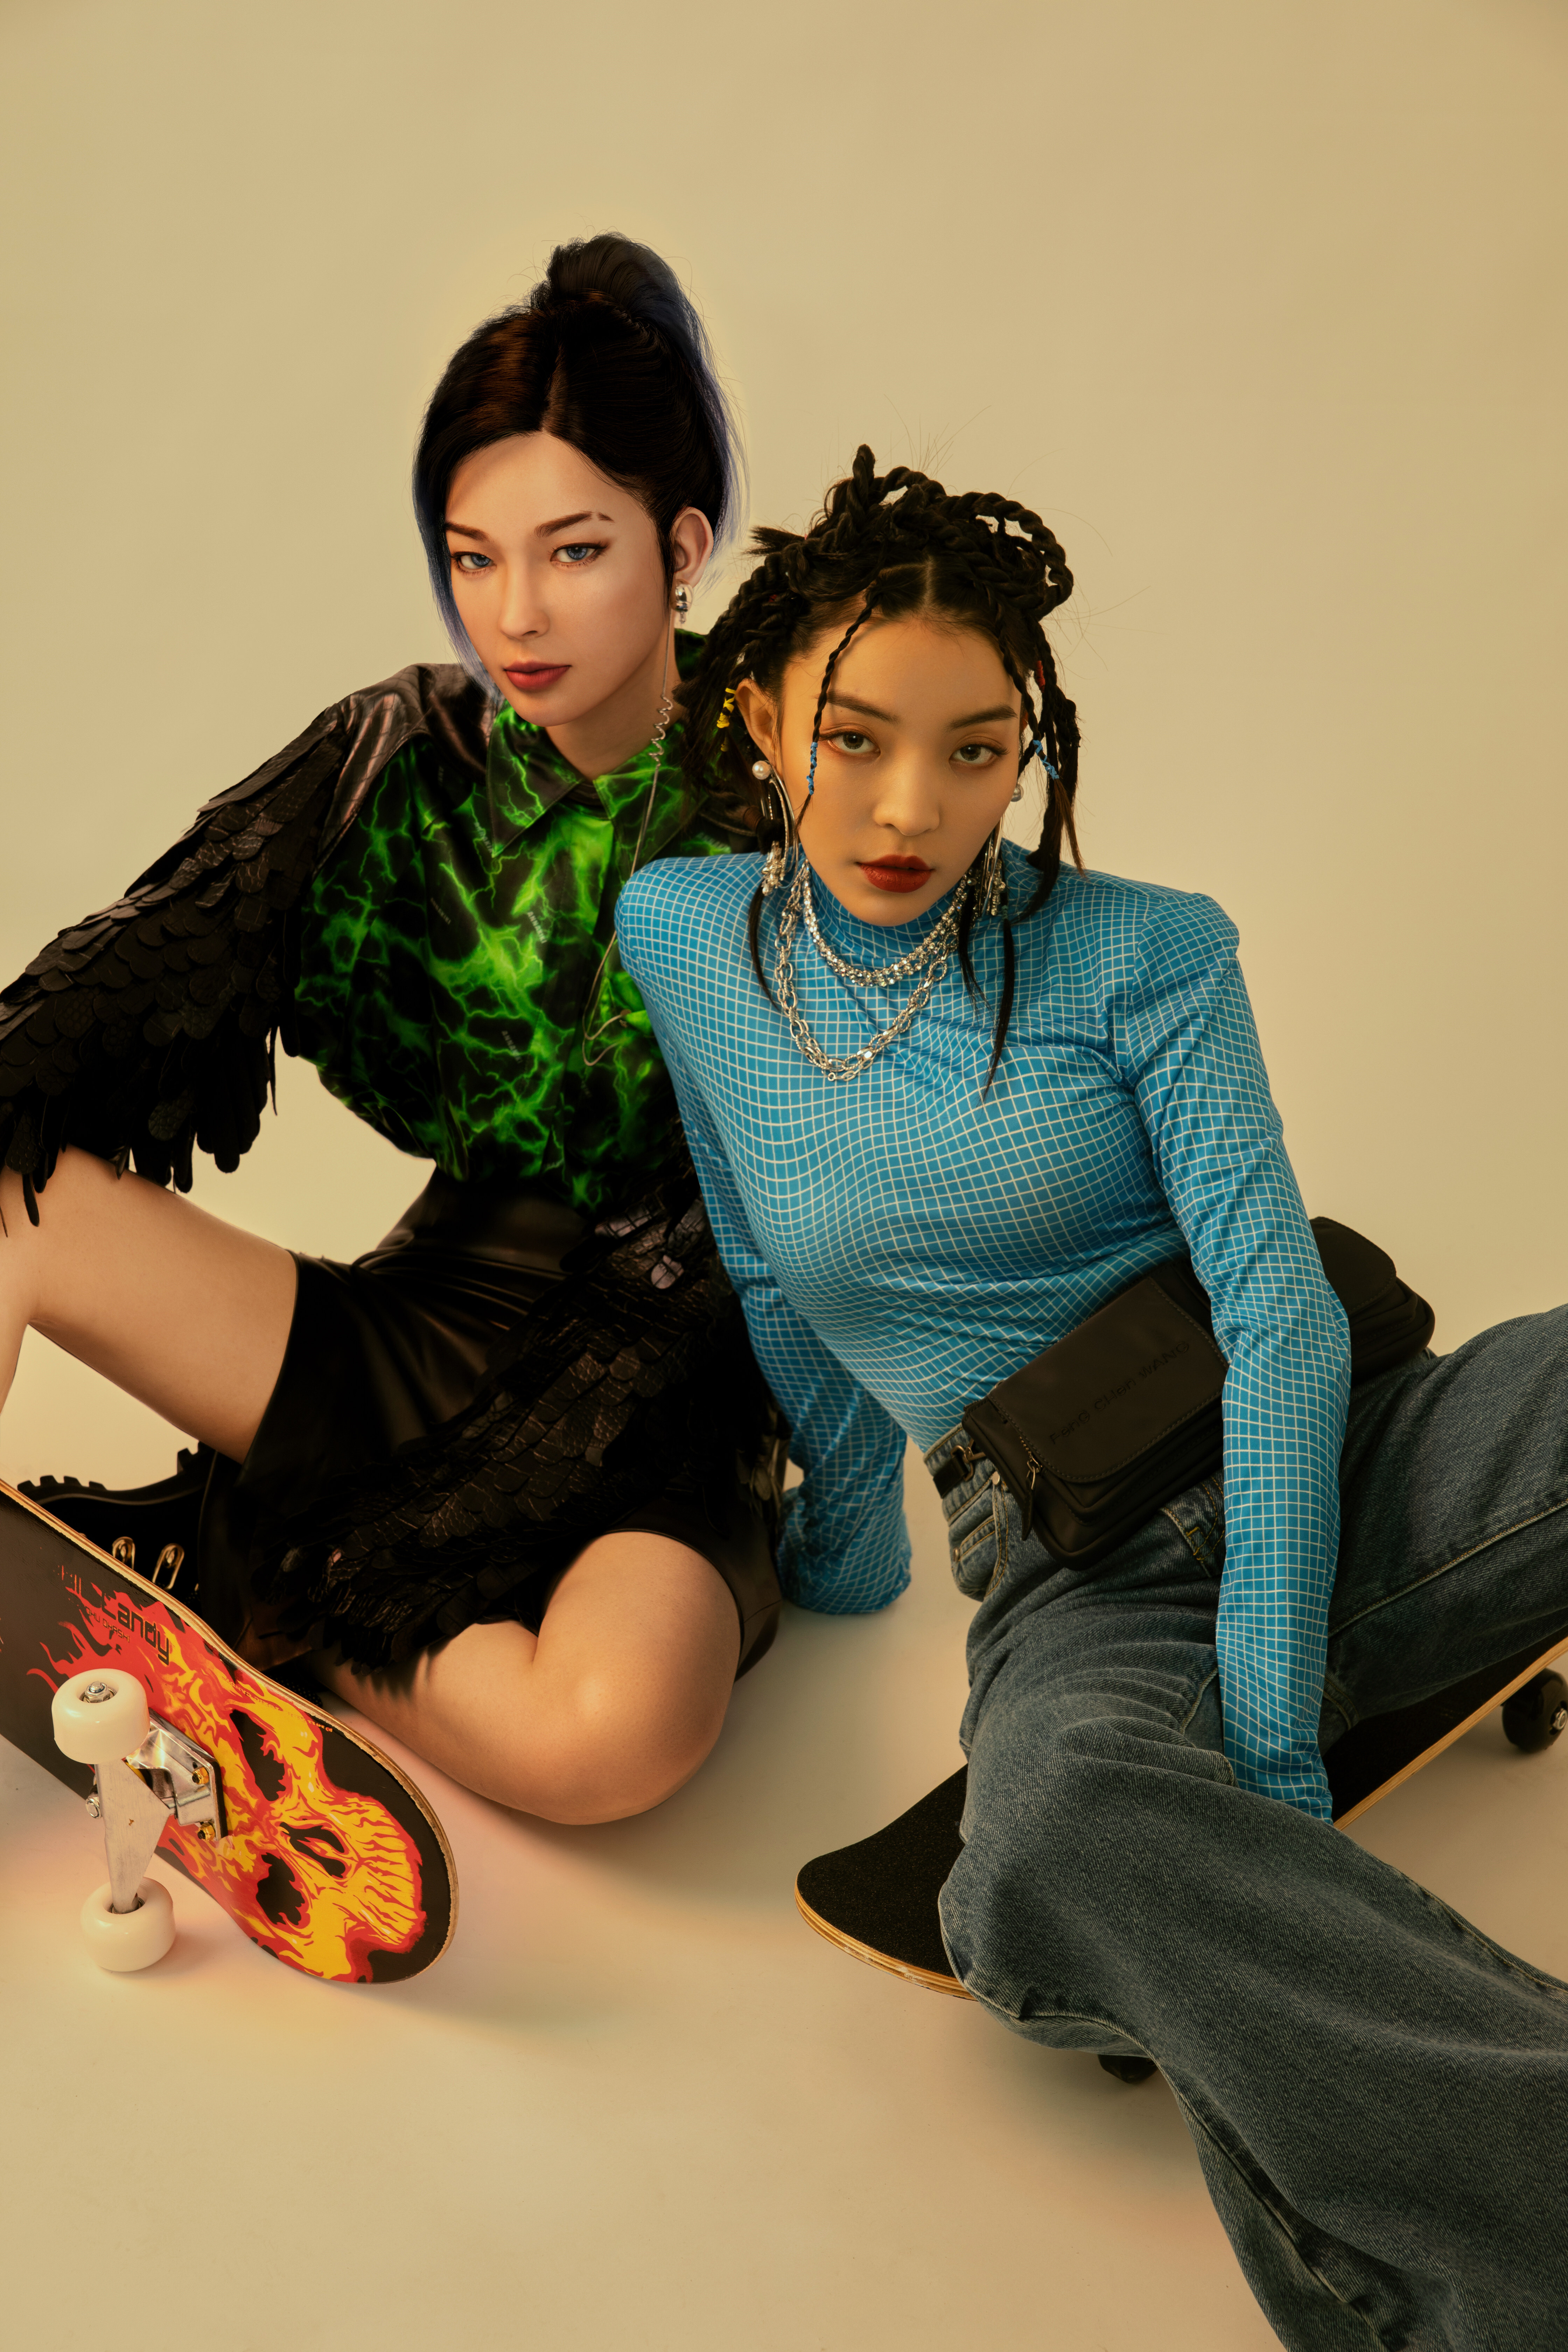 Singapore-based virtual influencer Rae (left) in a photo from Jstyle magazine with China’s top female rapper, Vava. With virtual influencers becoming increasingly popular in Asia, are they set to take over from their human counterparts?